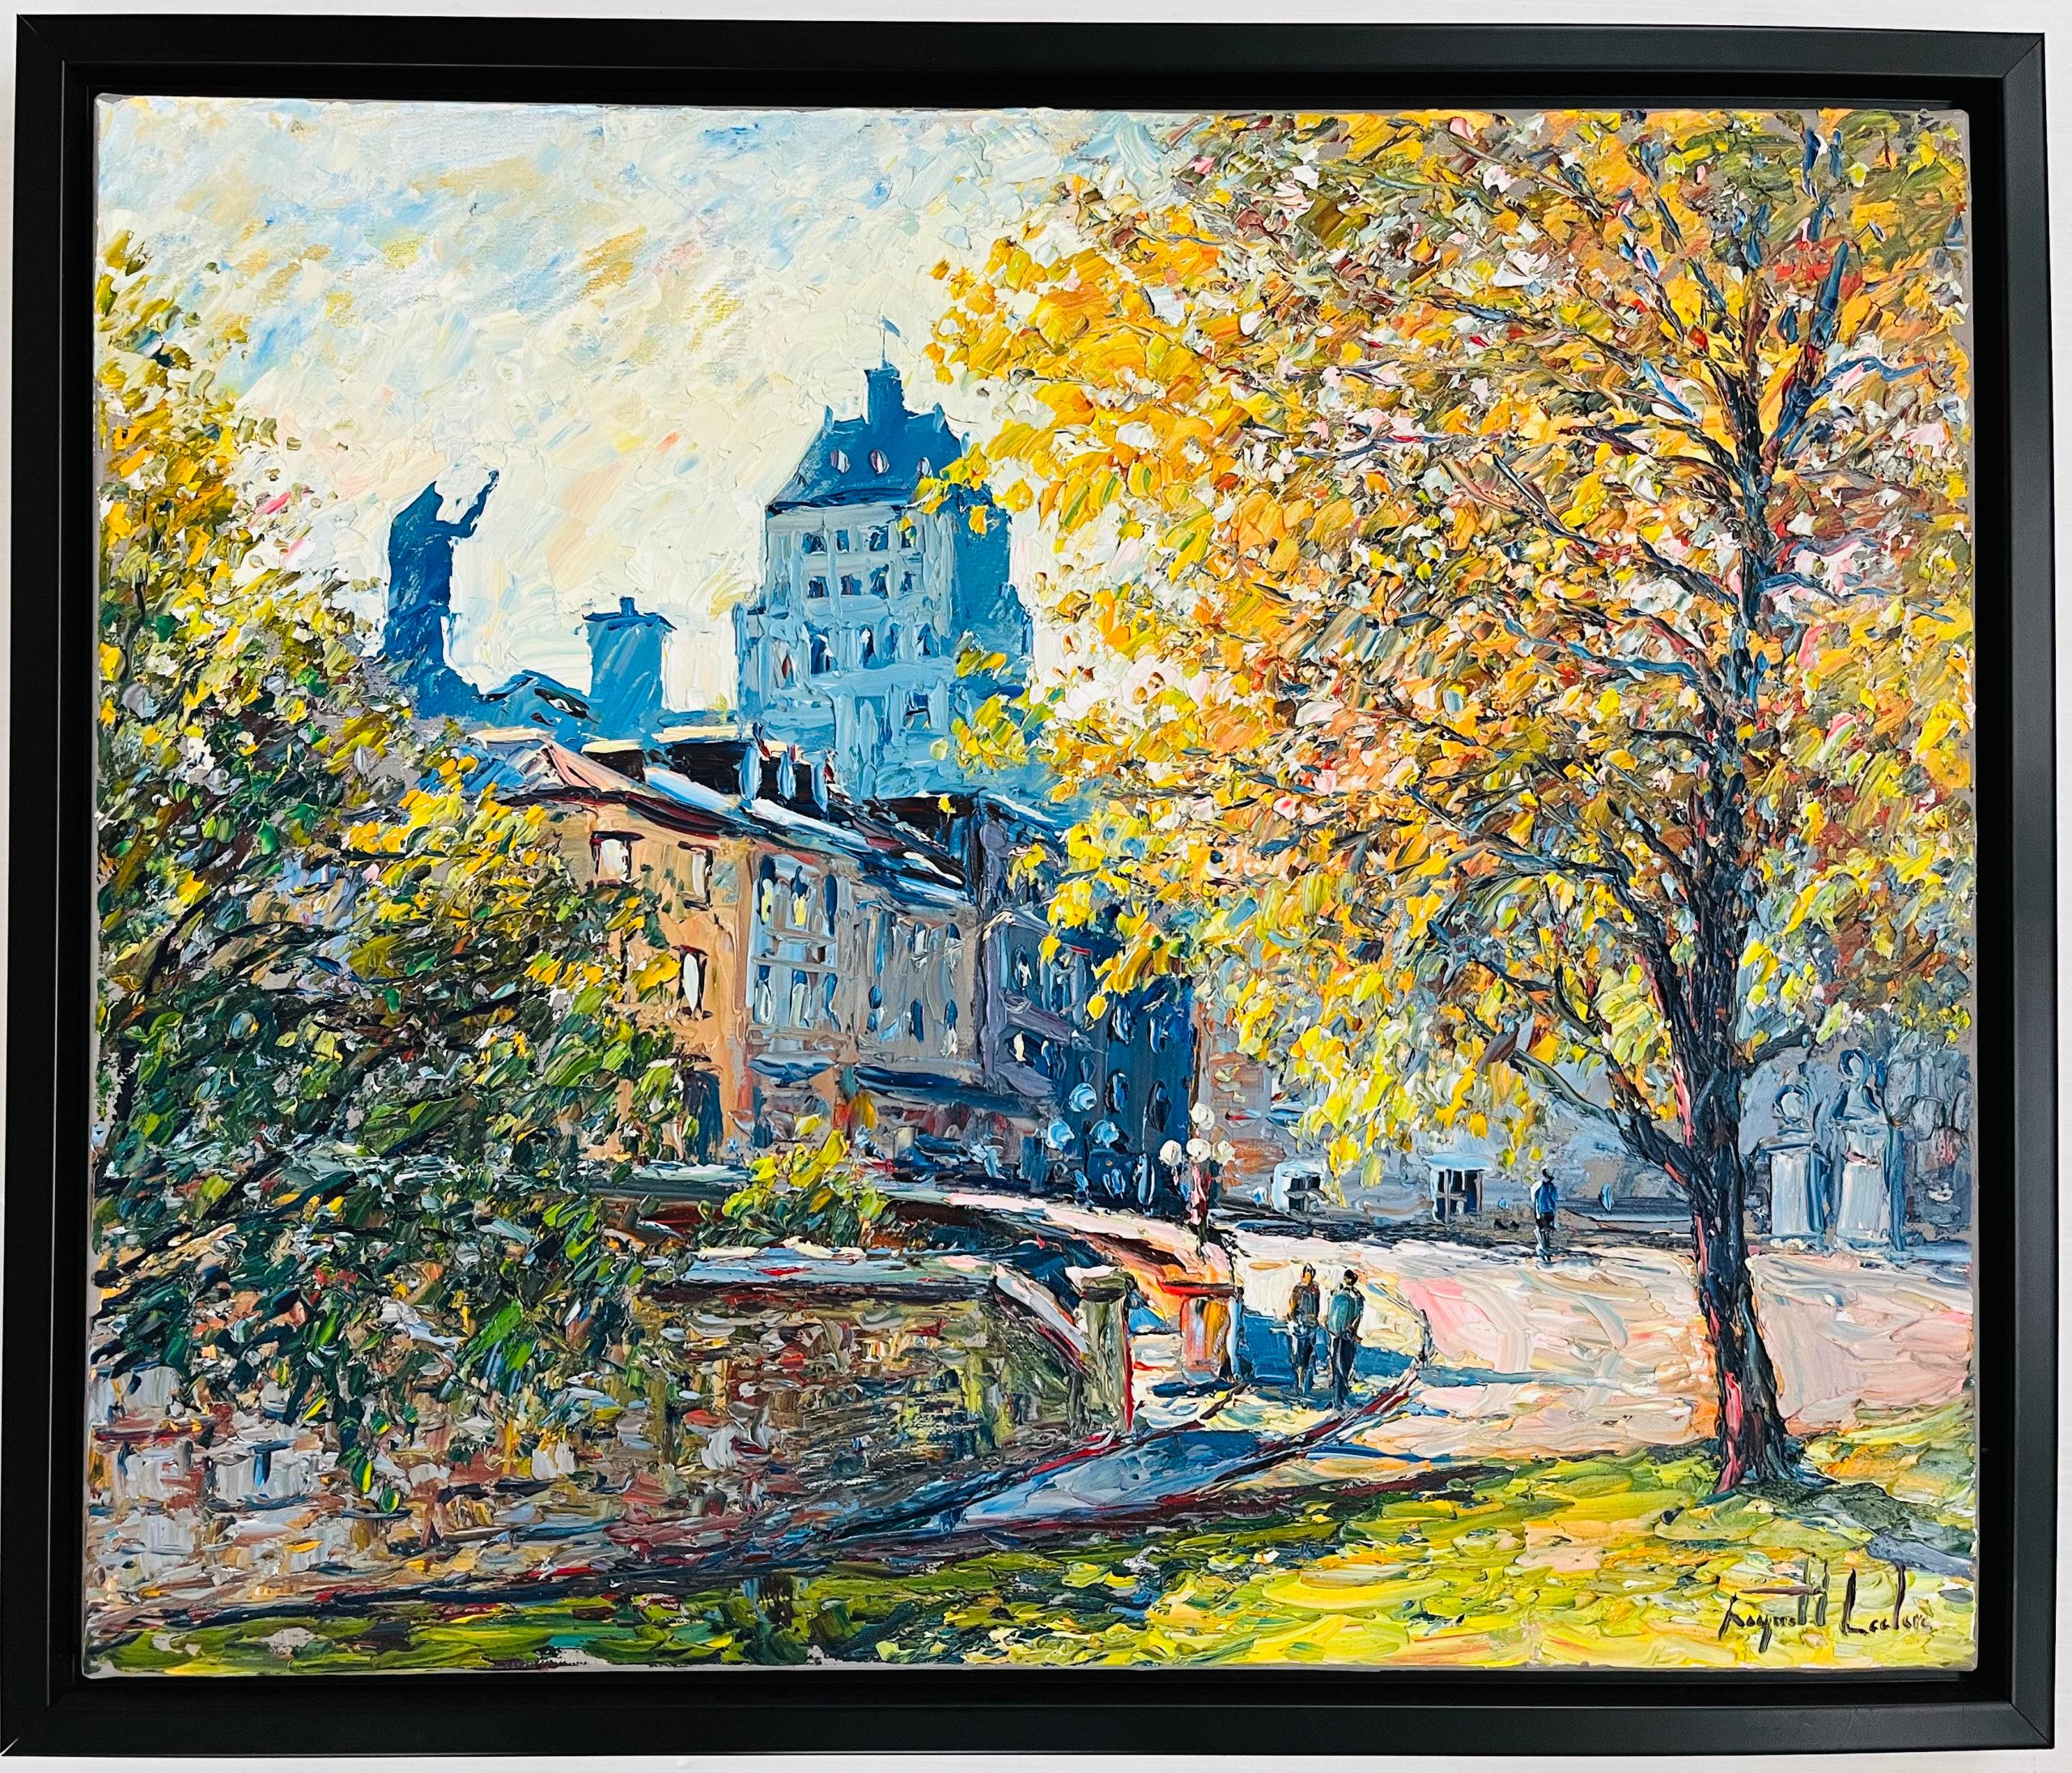 Parc Montmorency, Quebec - Painting by Raynald Leclerc